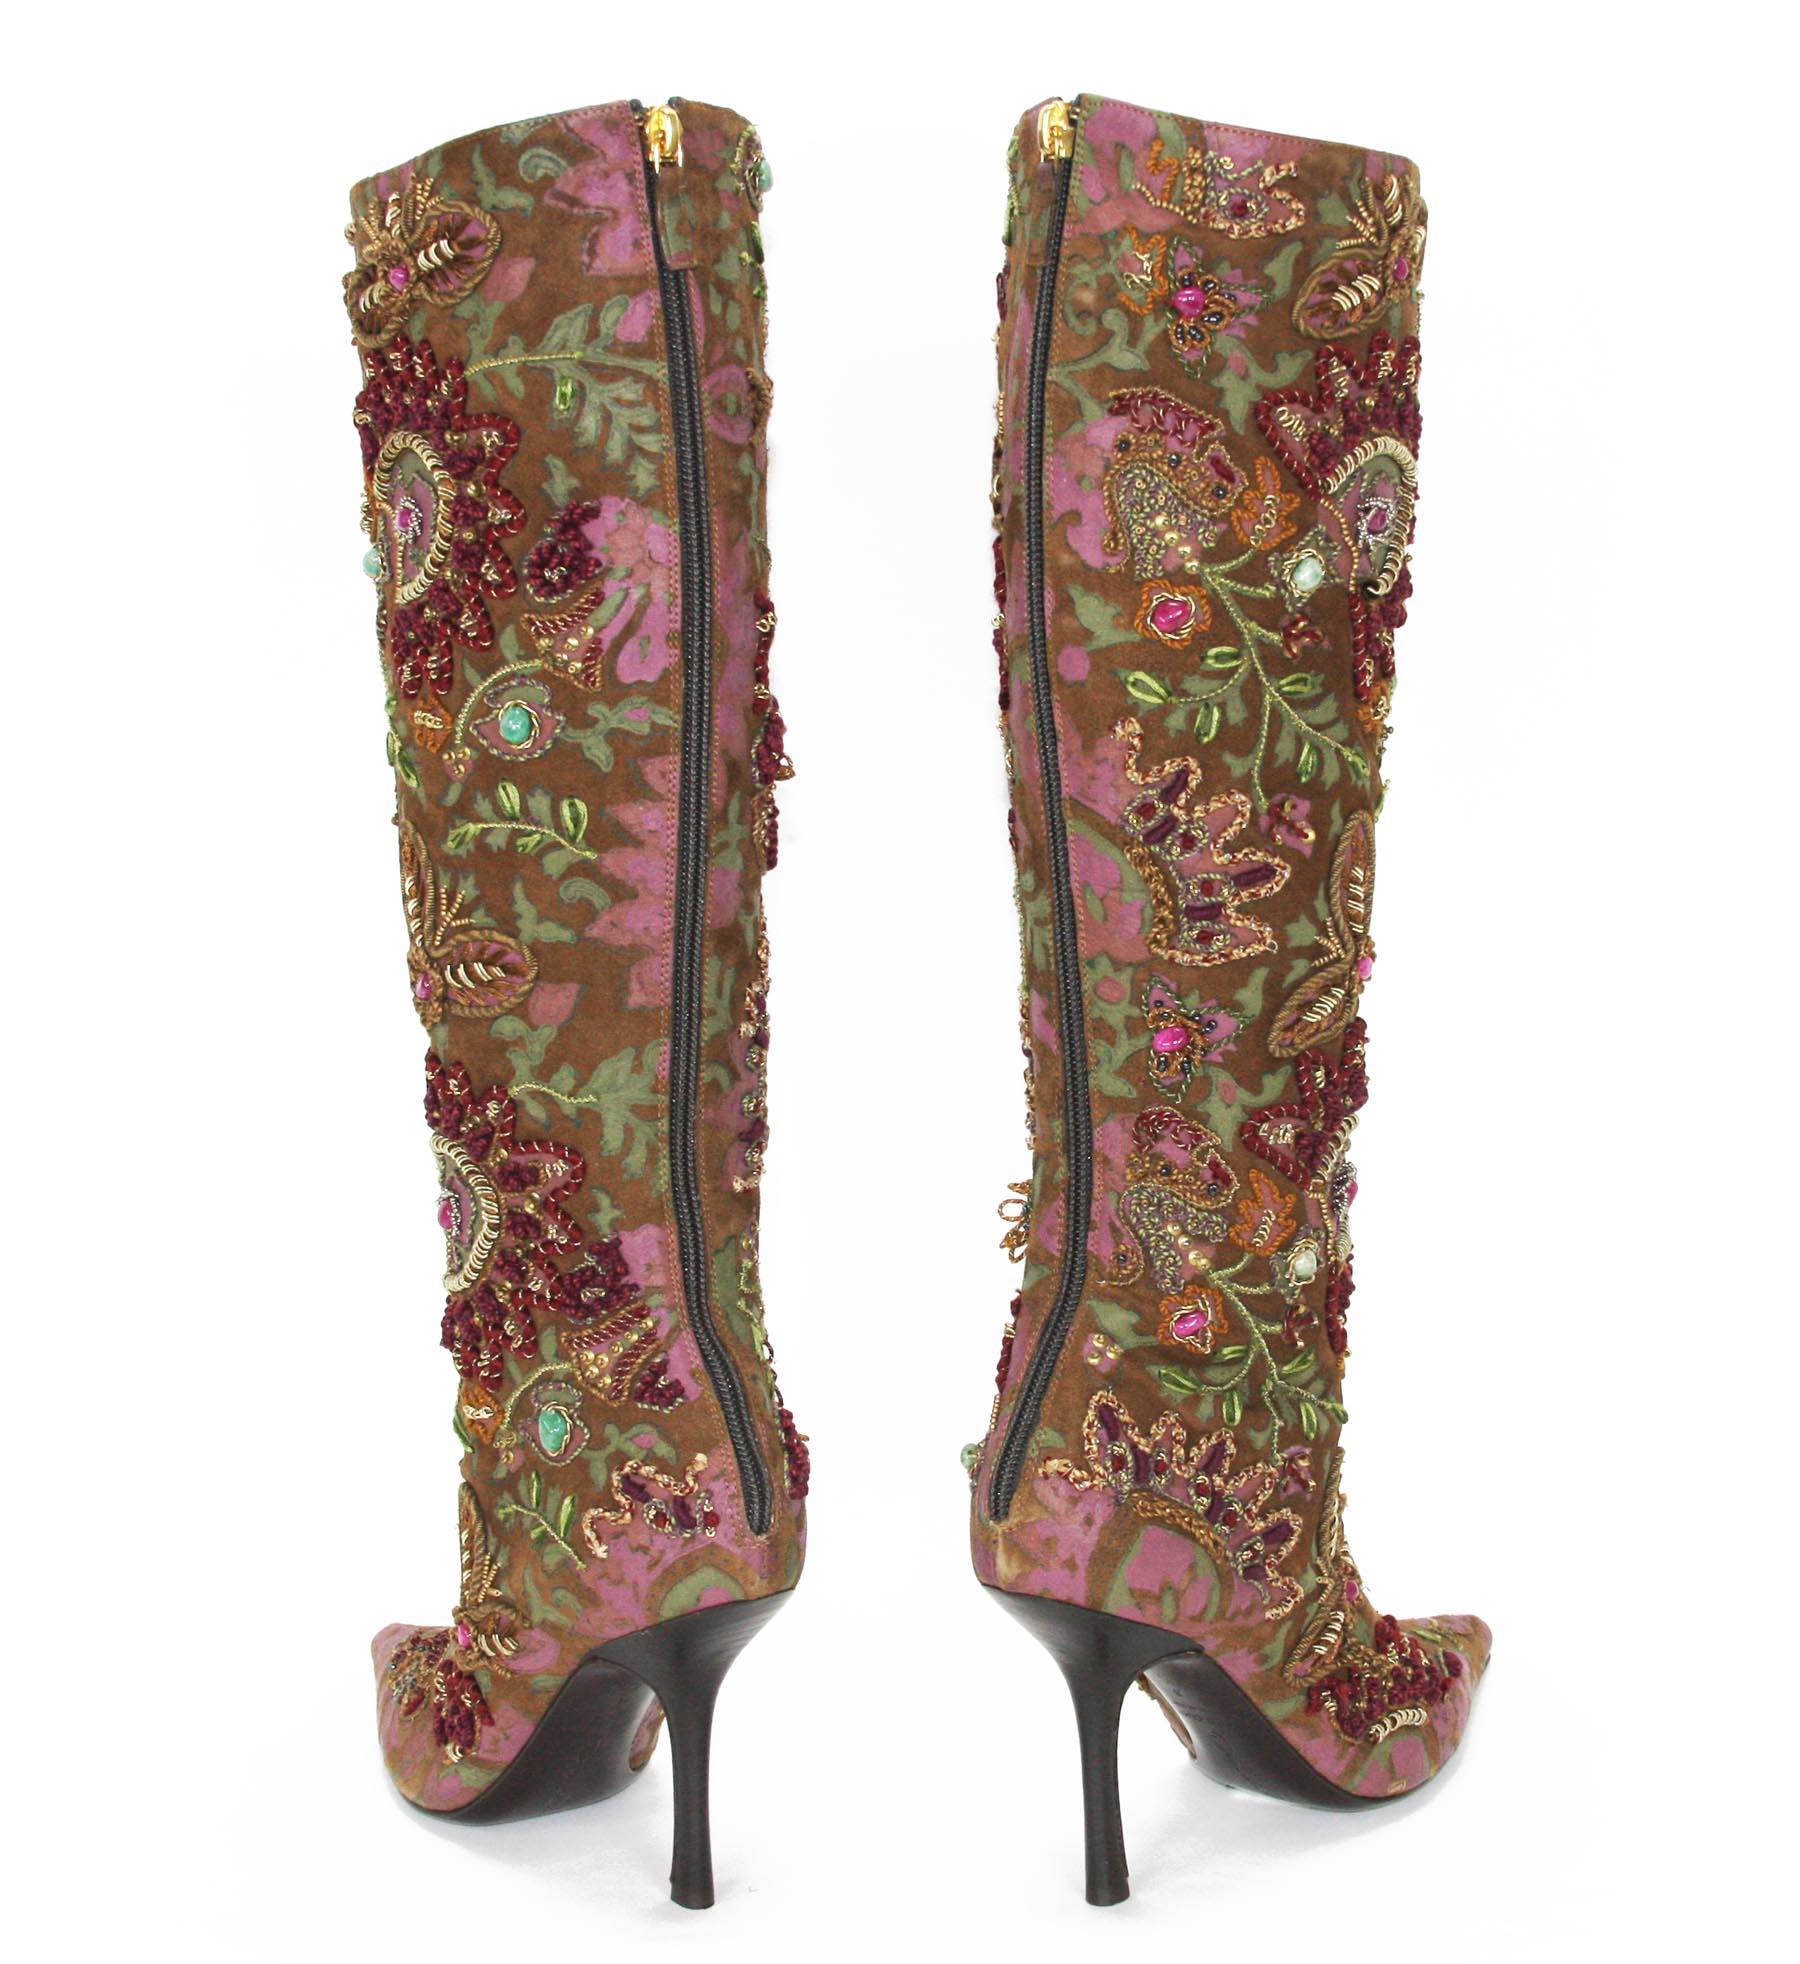 Brown New Oscar De La Renta F/W 2004 Hand Painted Embroidered Boots 36.6 - US 6.5 For Sale